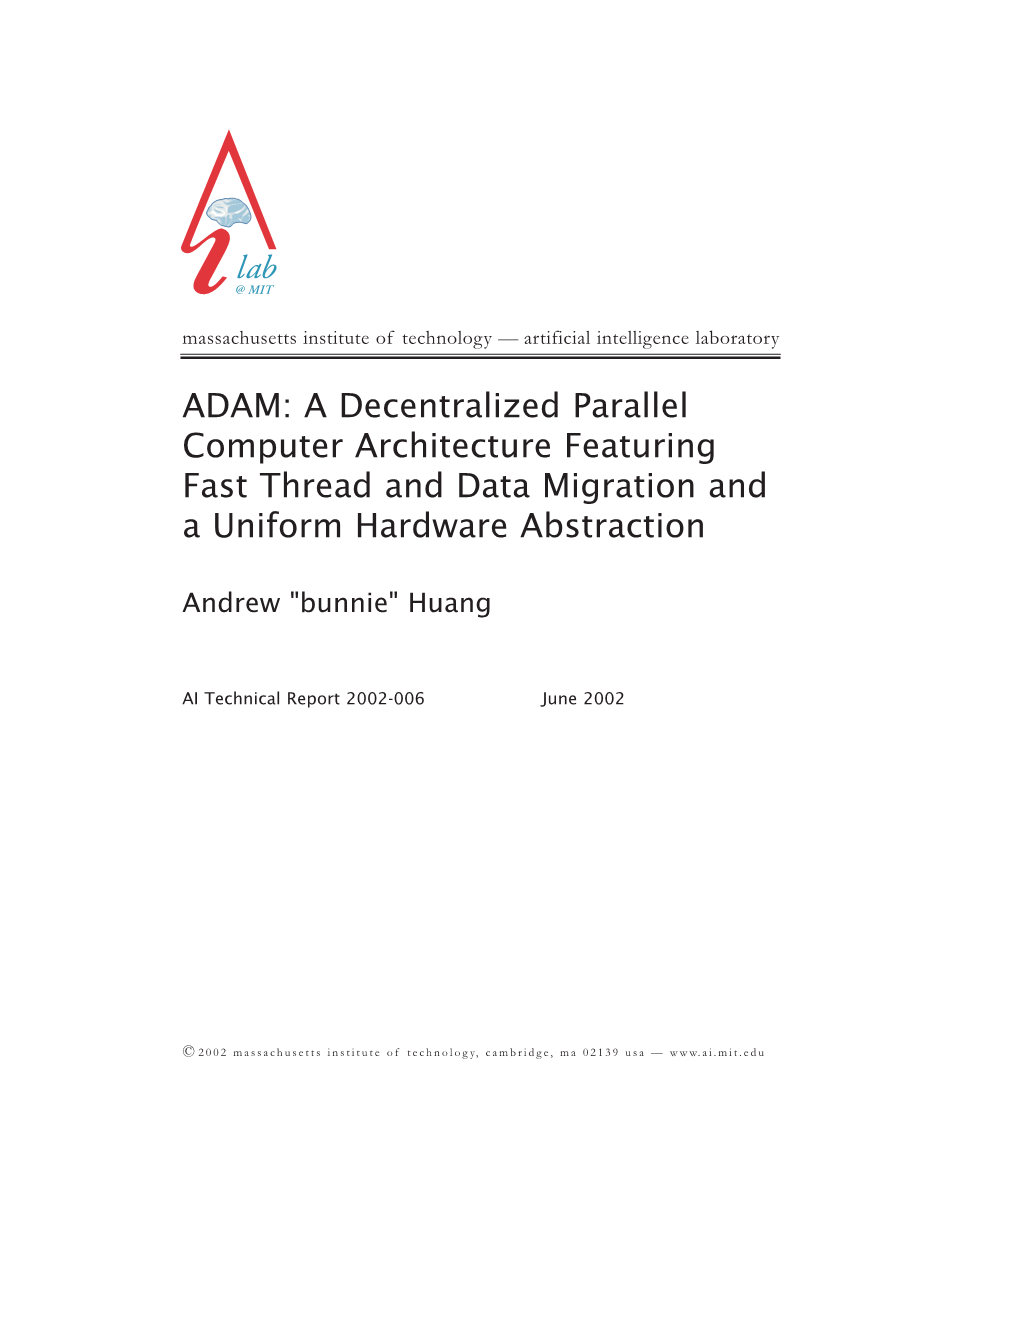 ADAM: a Decentralized Parallel Computer Architecture Featuring Fast Thread and Data Migration and a Uniform Hardware Abstraction